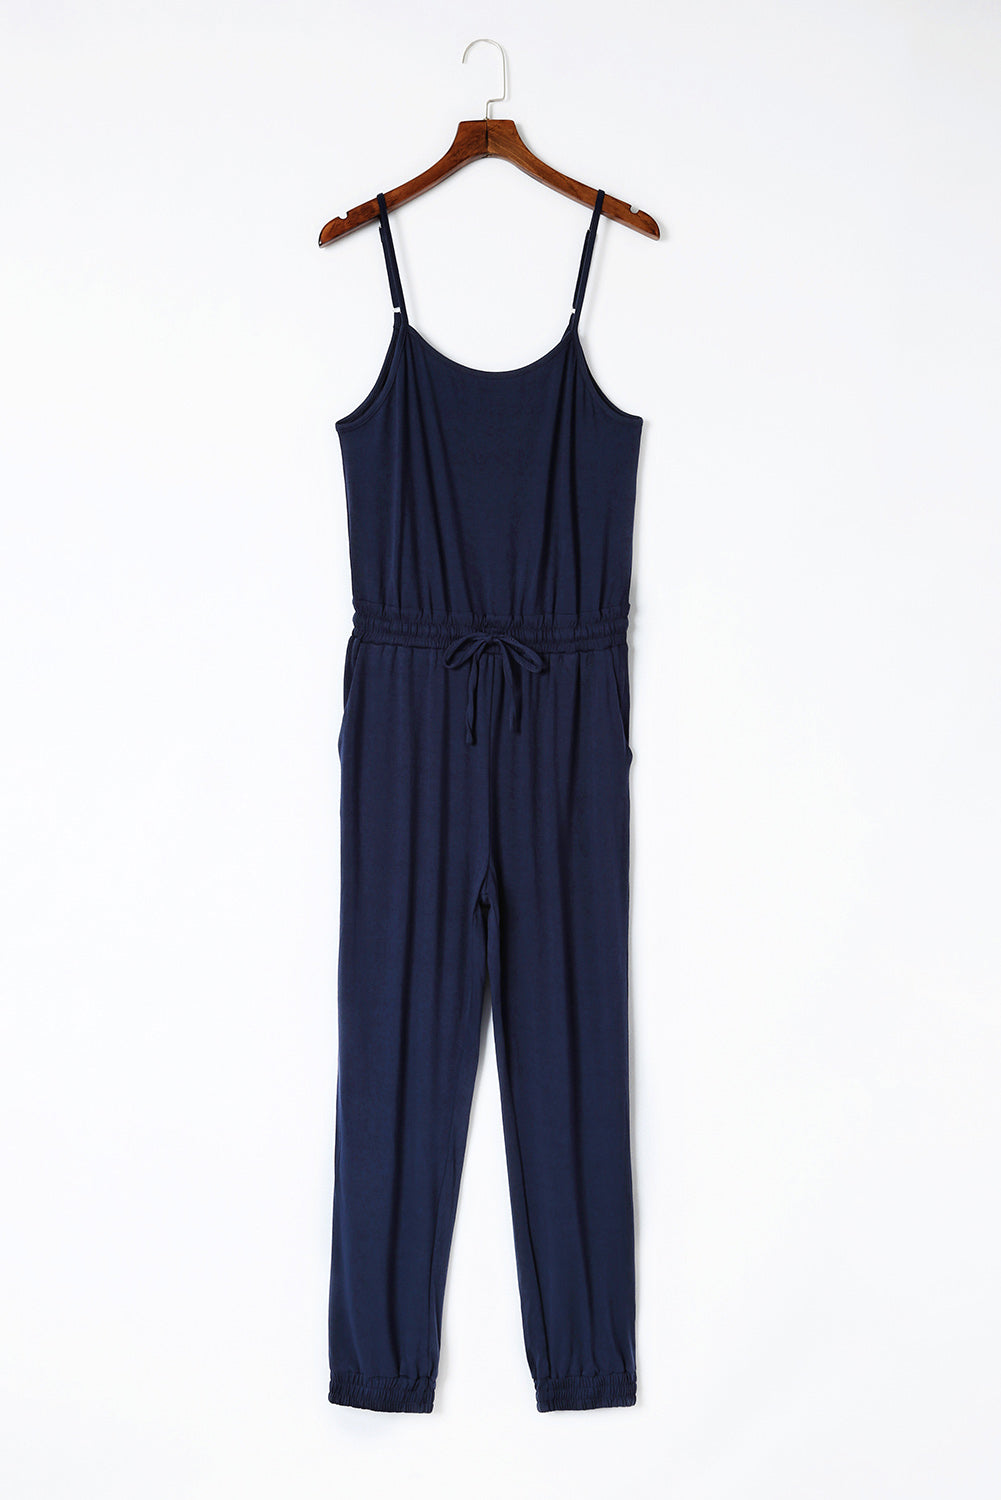 Spaghetti Strap Jumpsuit with Pockets  Sunset and Swim Navy S 